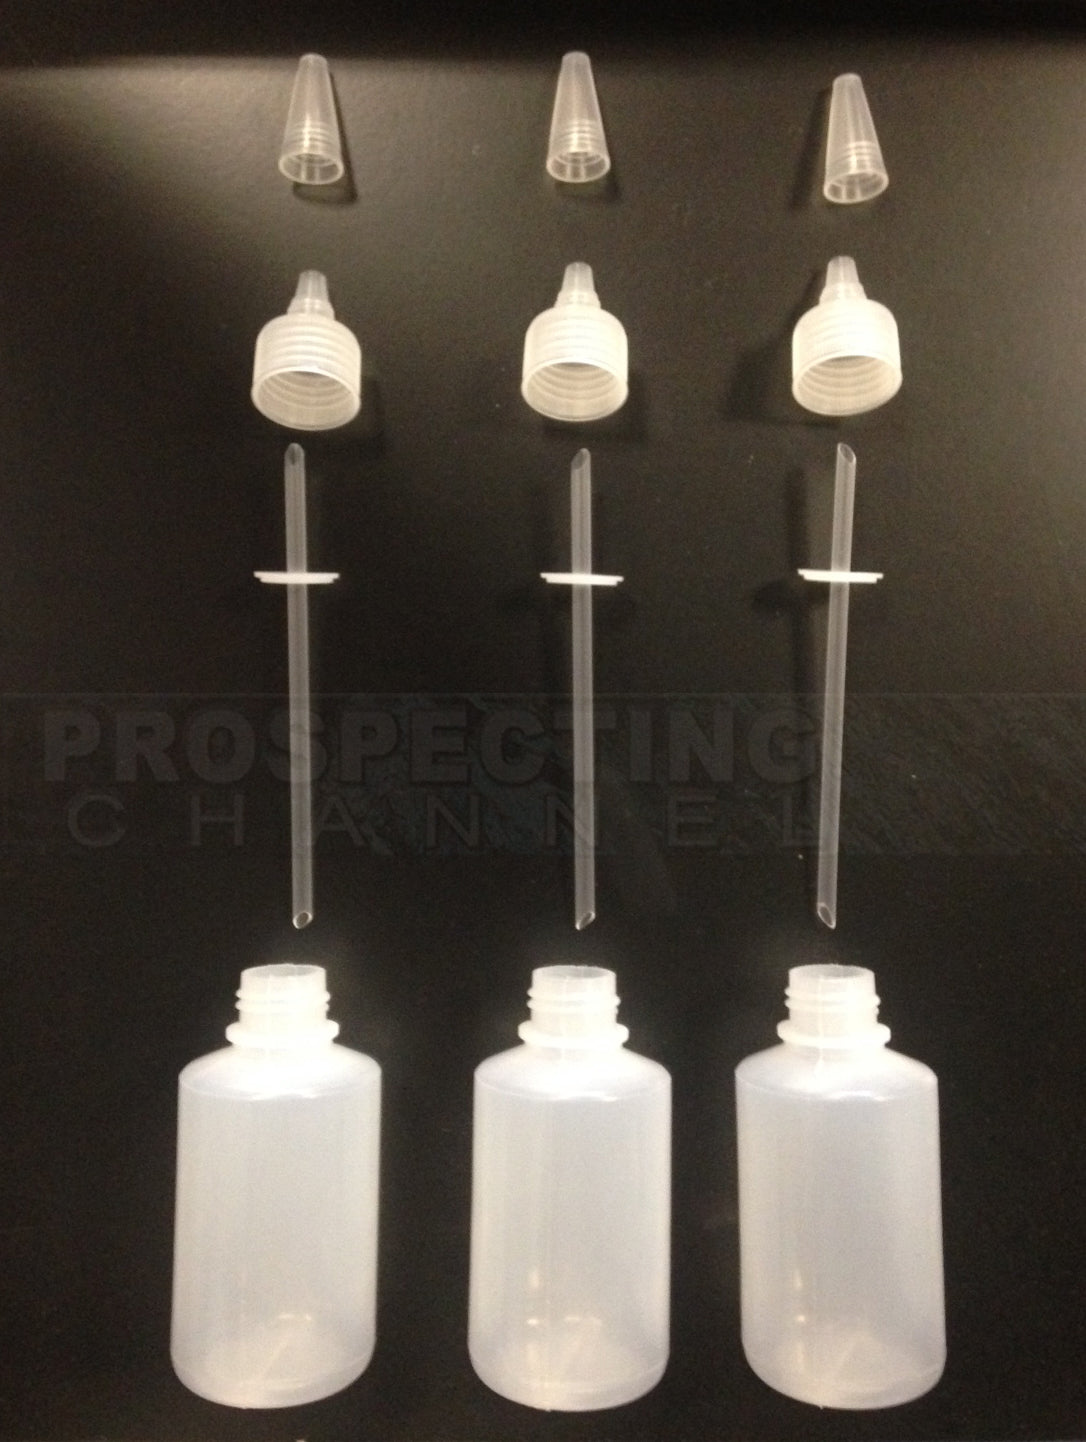 3 Snuffer suction plastic Bottles with Caps Seal and Straws 5 Inch